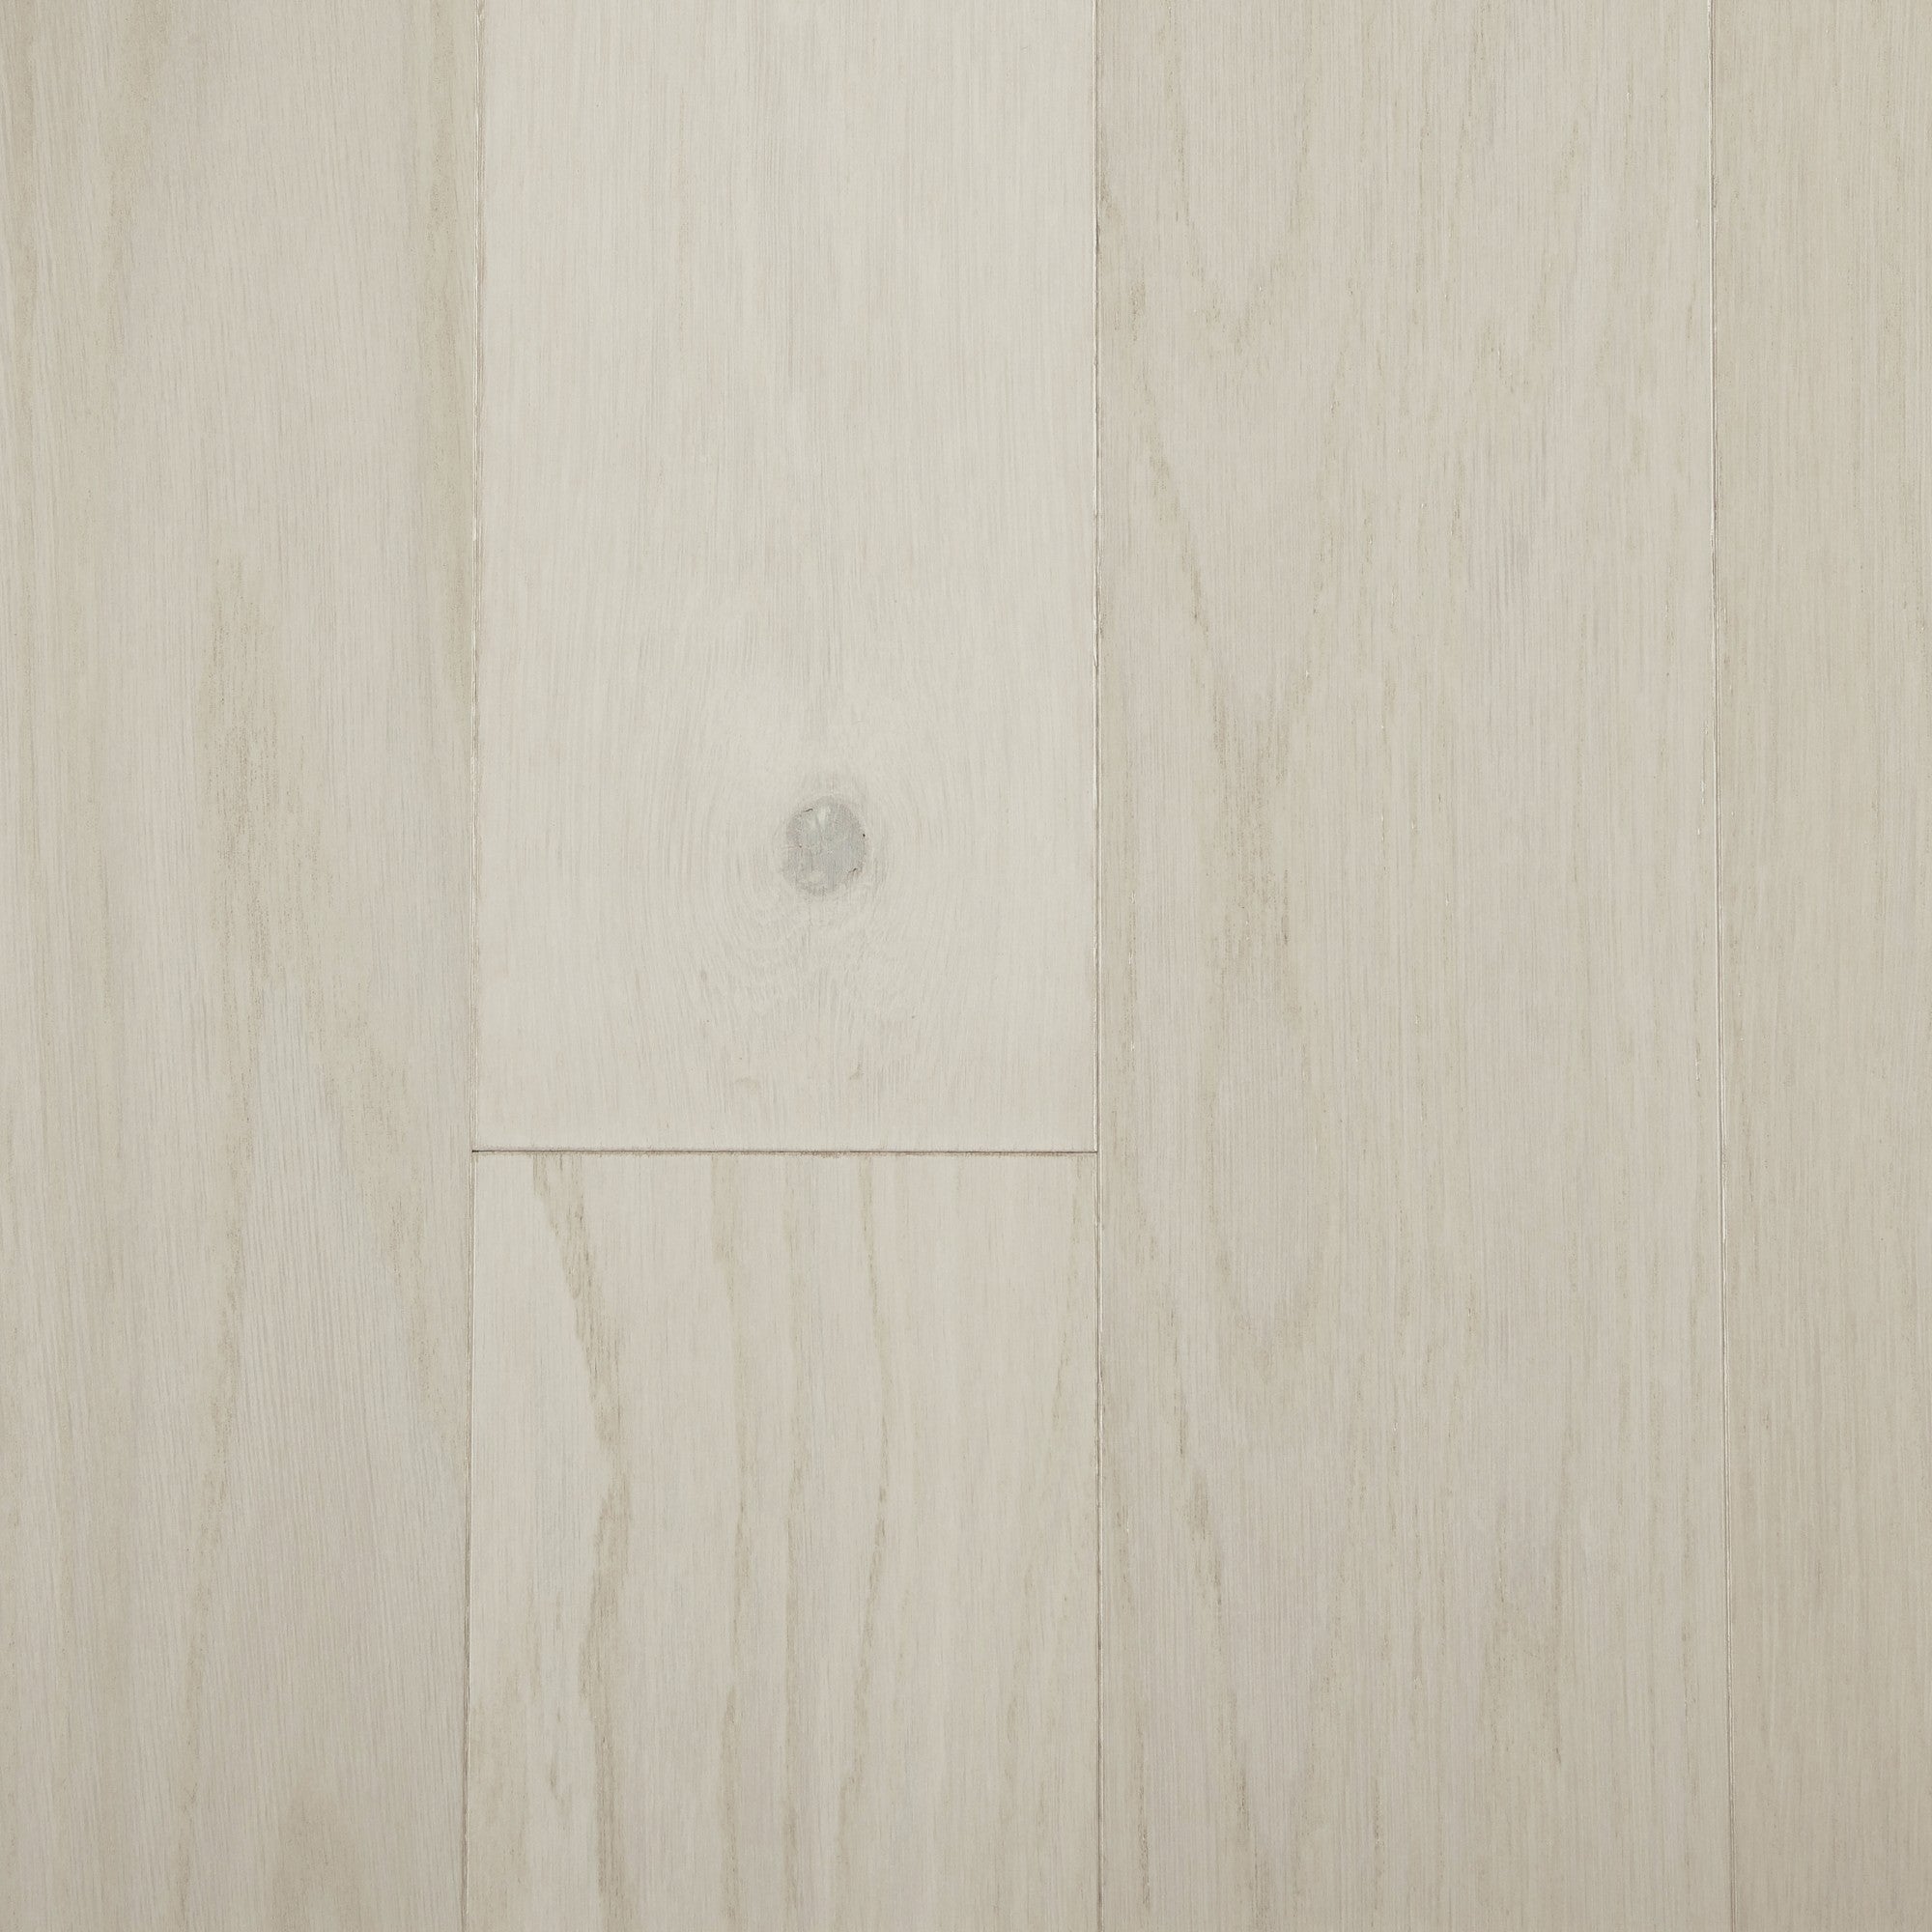 Vintage Northern Solid Sawn White Oak Oracle Smooth 6 1/2" x 3/4" Pearl Low Sheen Character Grade